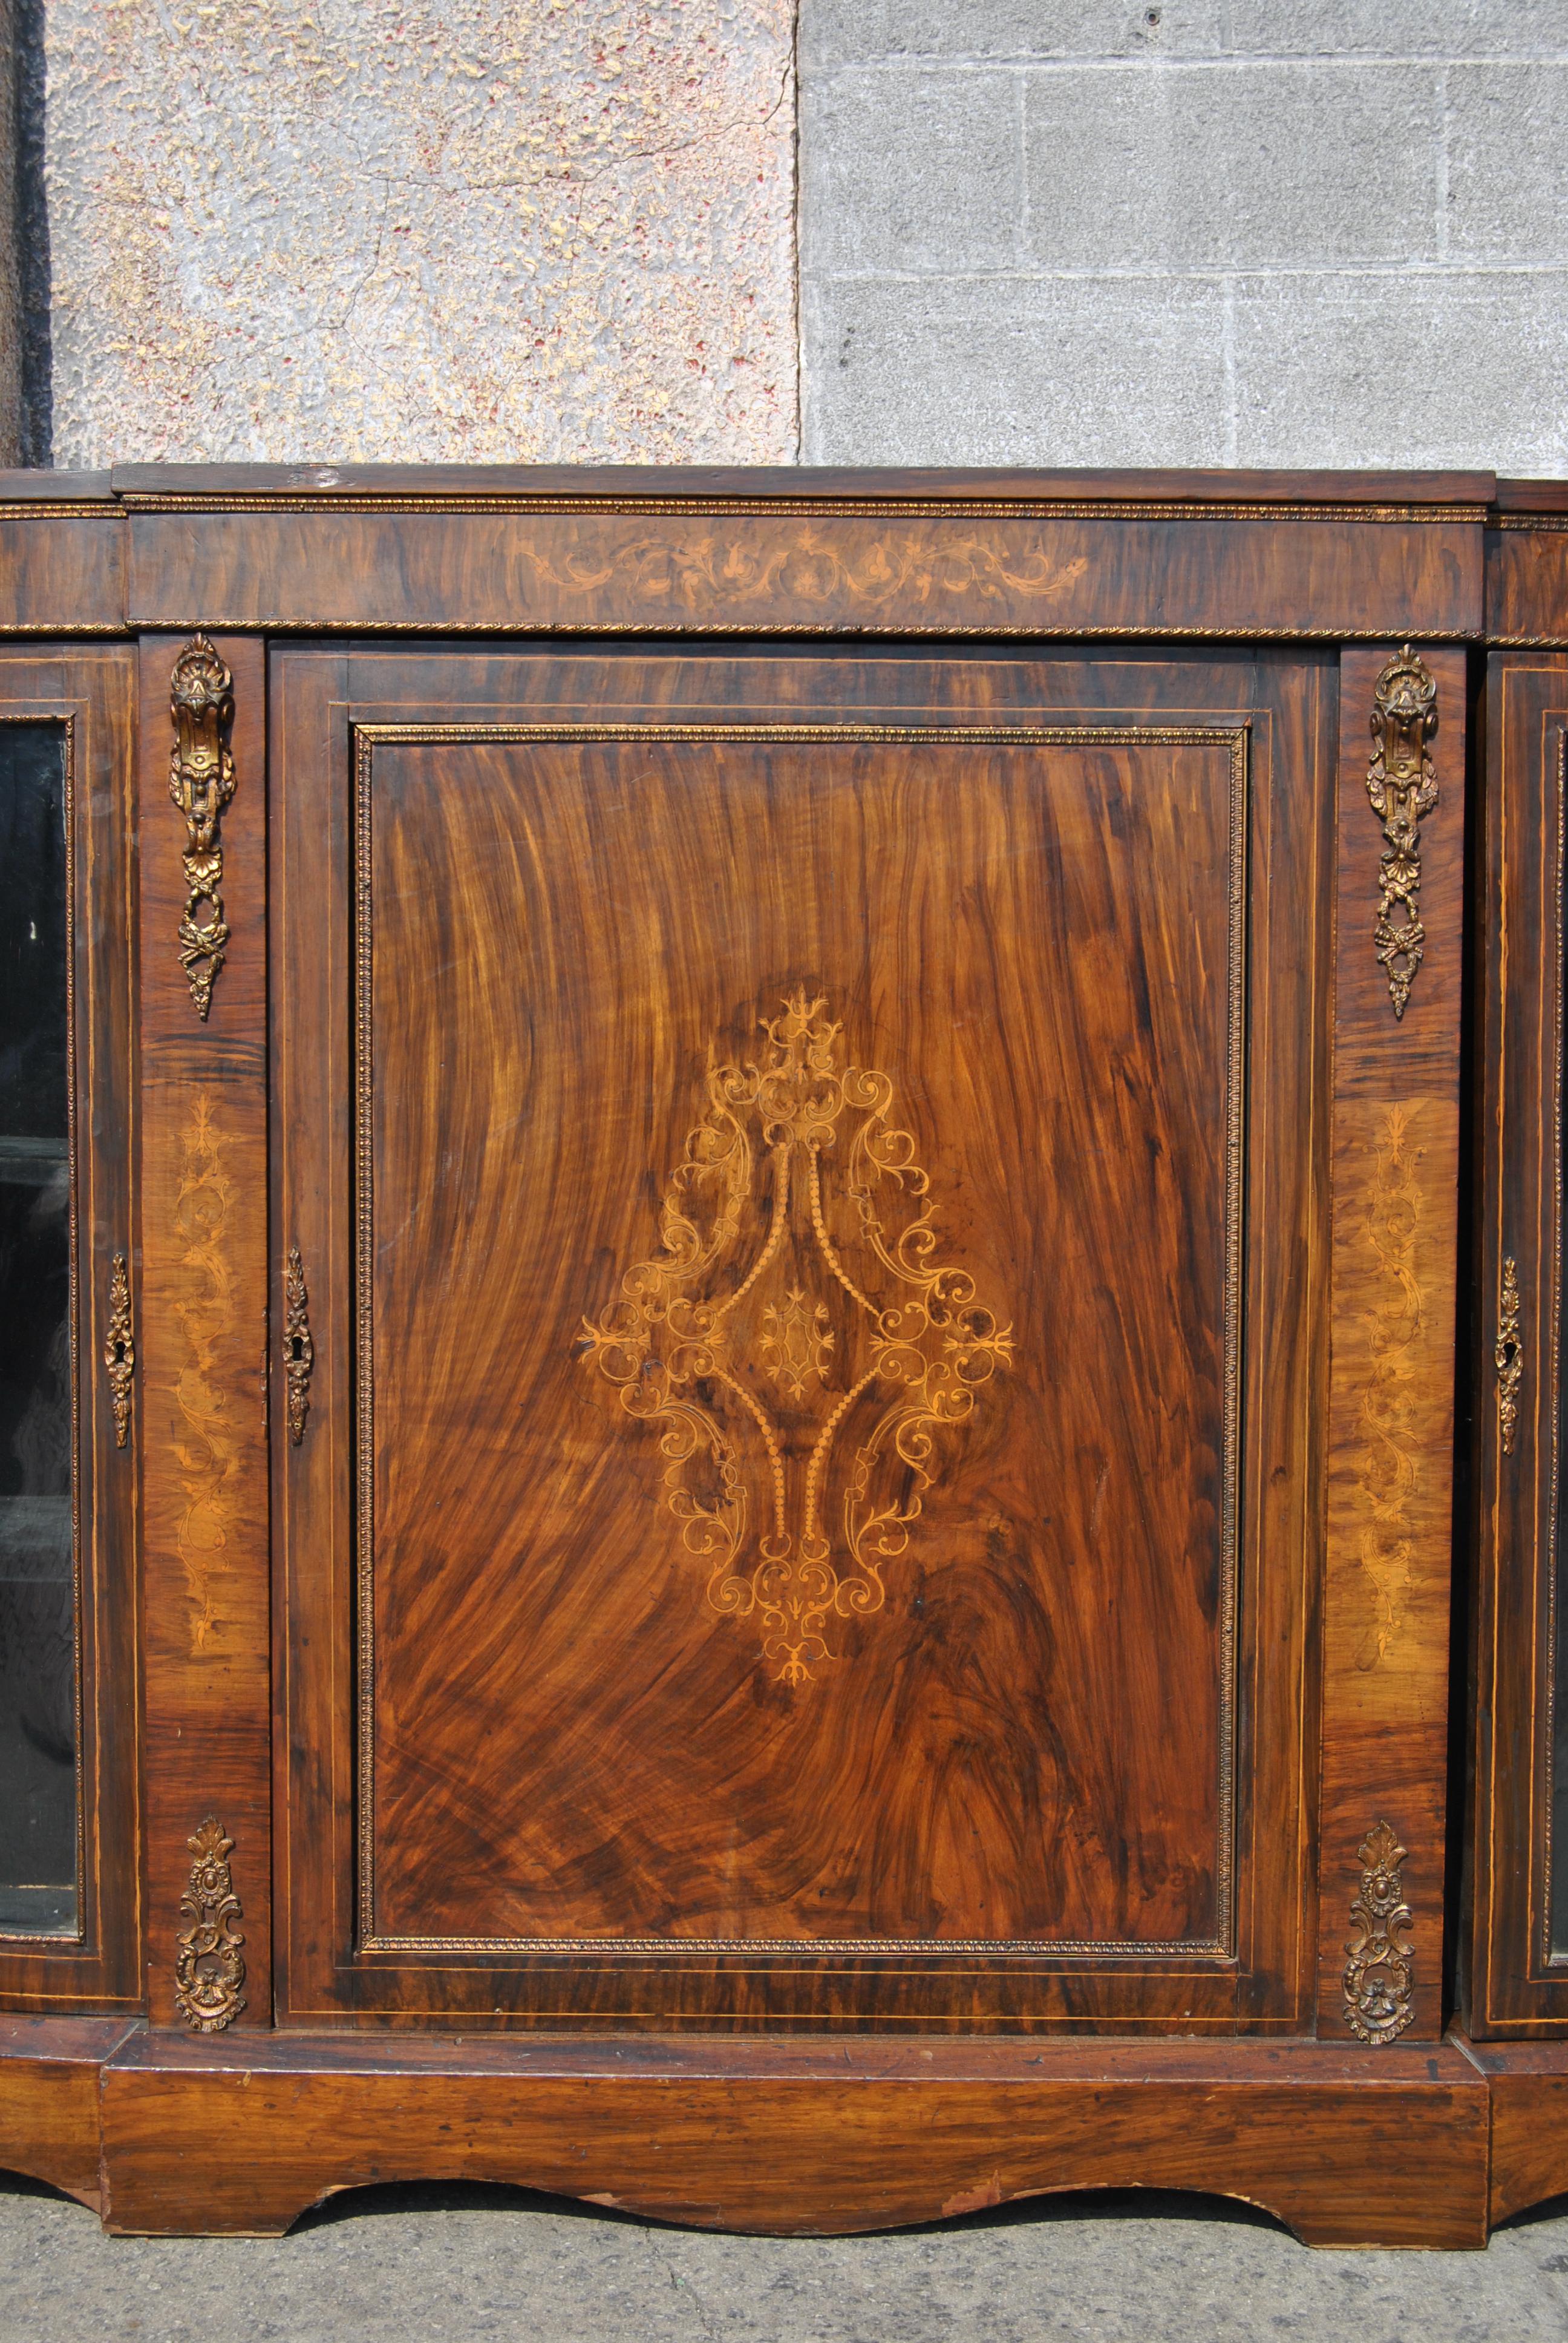 This is a credenza, hall table, side table, server or display cabinet, made in England, circa 1870. It is made of a beautiful, highly figured cut of burr walnut. The cabinet has rounded ends with bowed glass in each of the doors on the right and